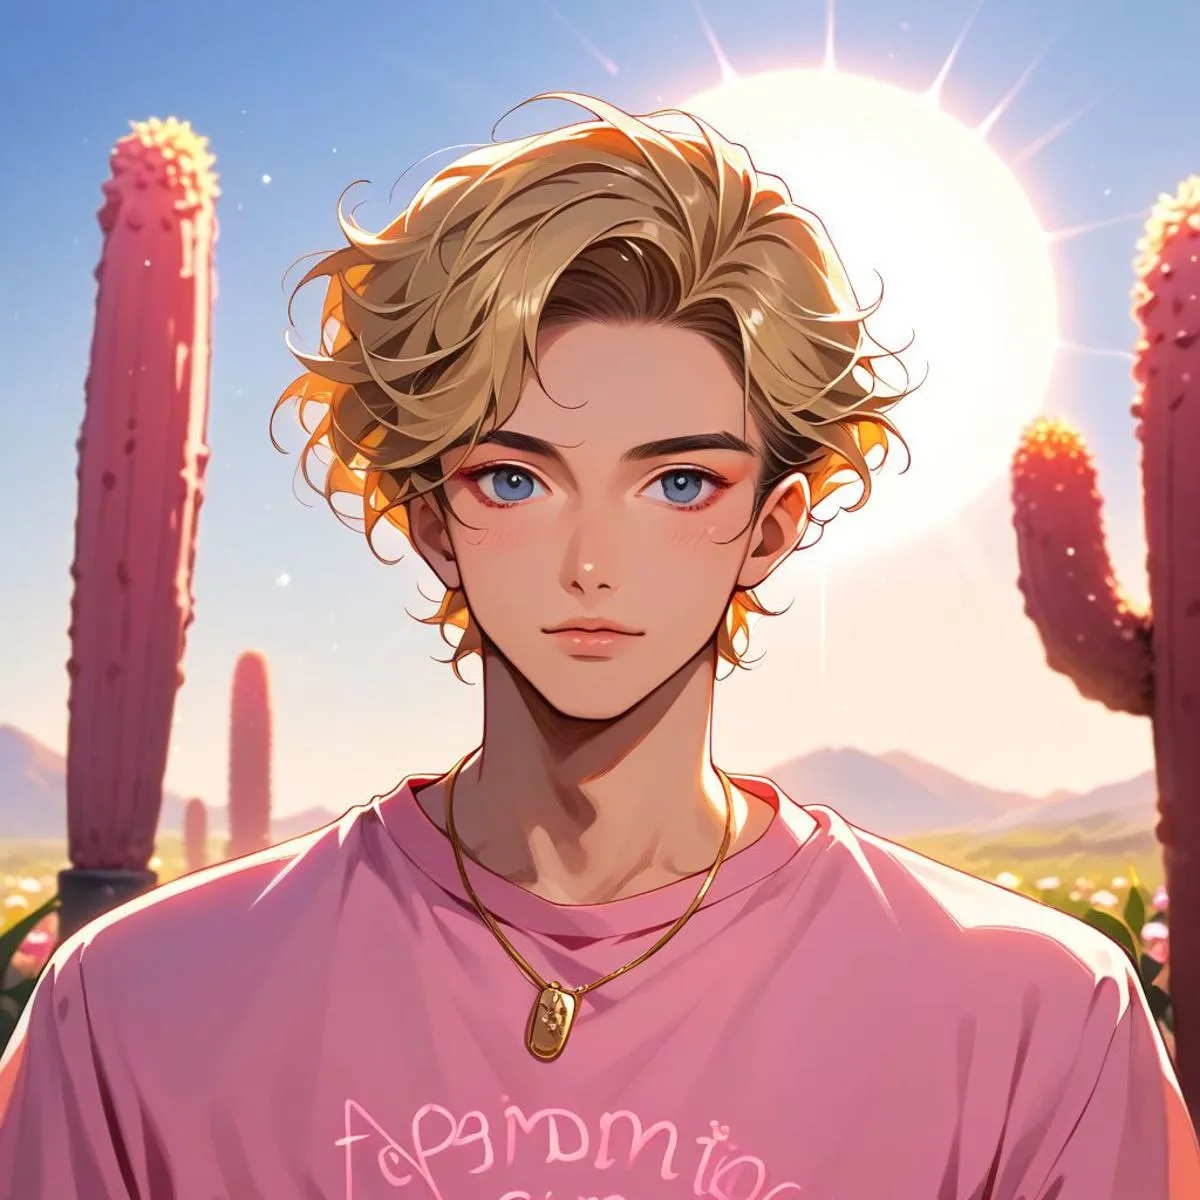 Adolescent anime character with blonde hair standing in a desert with cacti and a bright sun in the background. This image was created using Stable Diffusion.